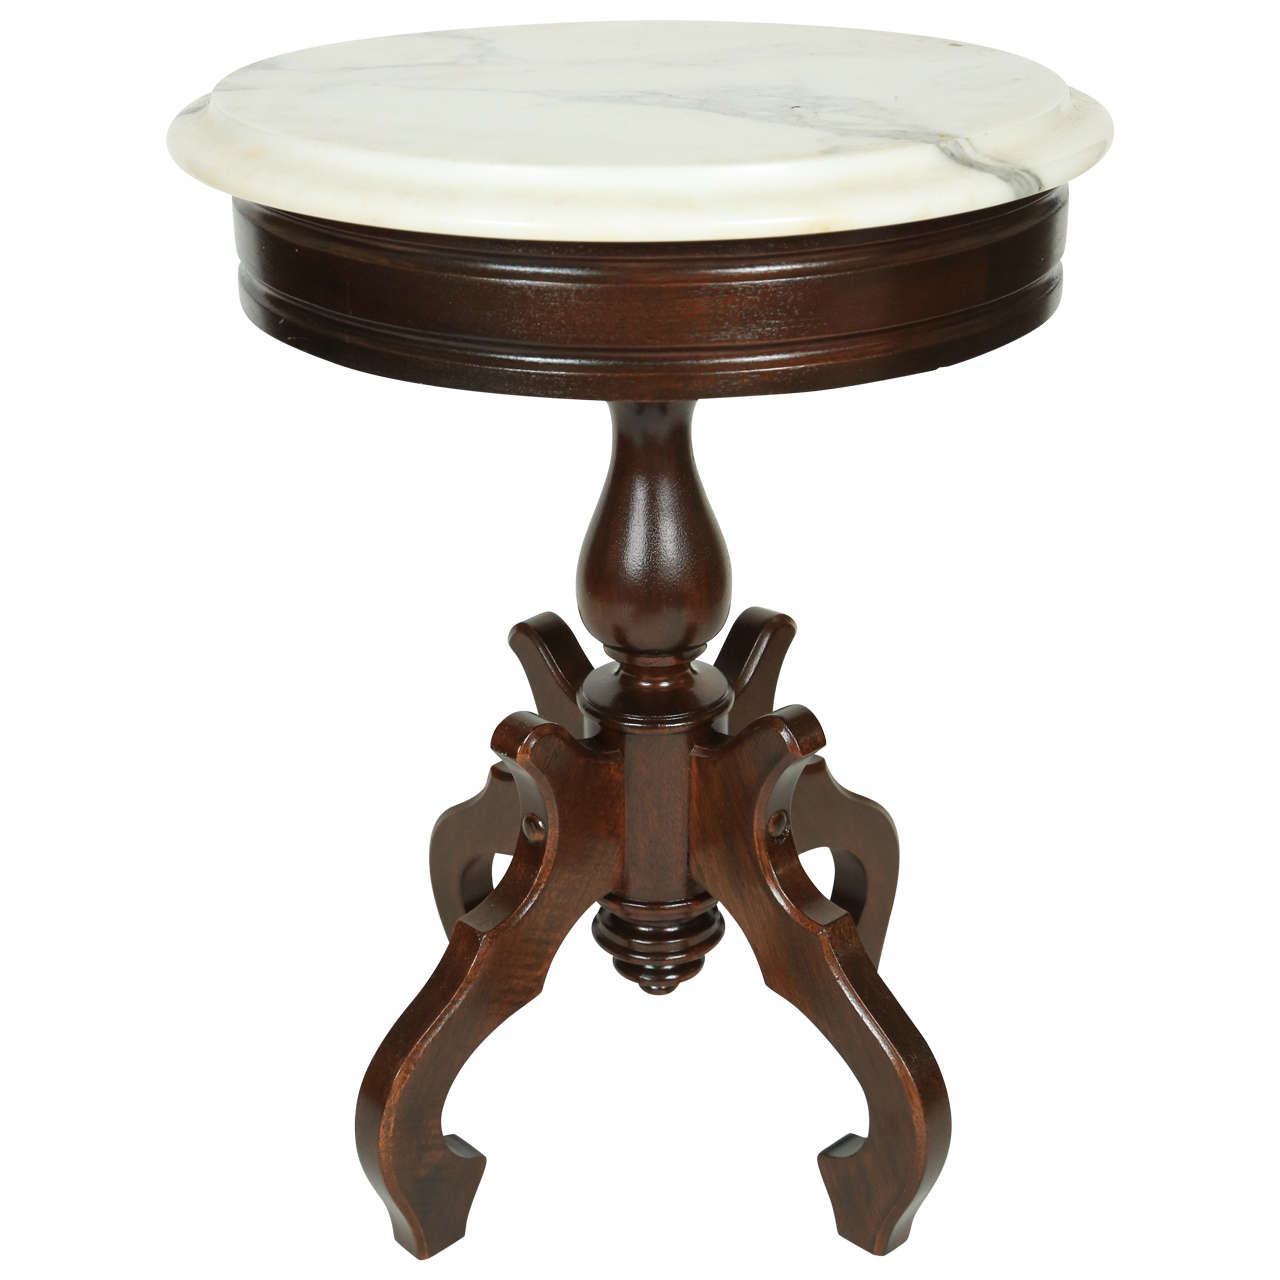 Victorian Mahogany Table with Marble Top